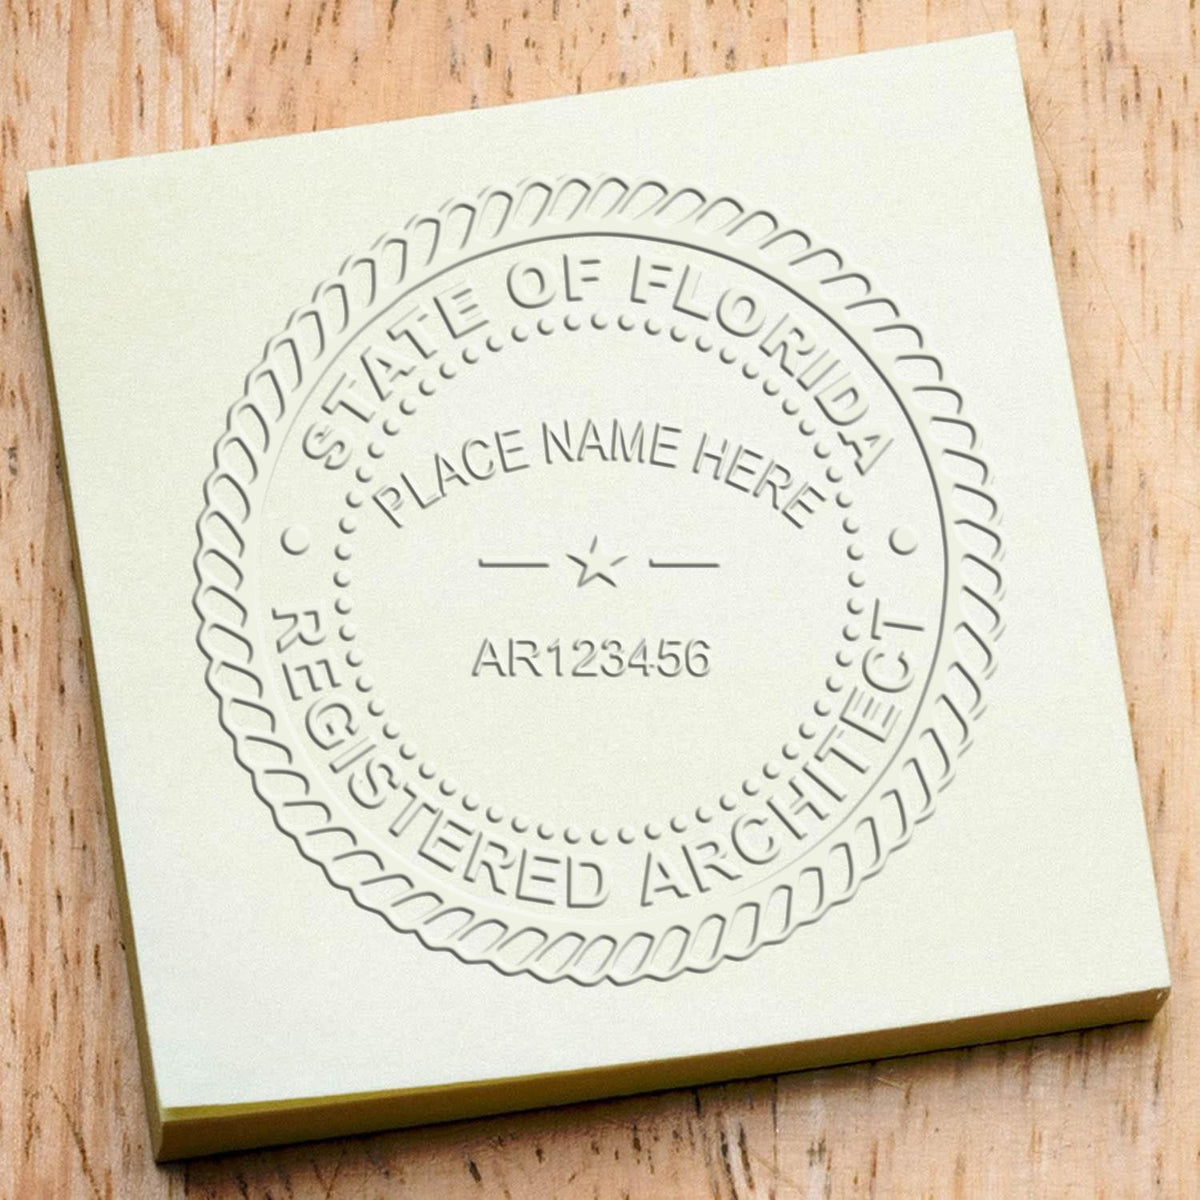 The Gift Florida Architect Seal stamp impression comes to life with a crisp, detailed image stamped on paper - showcasing true professional quality.